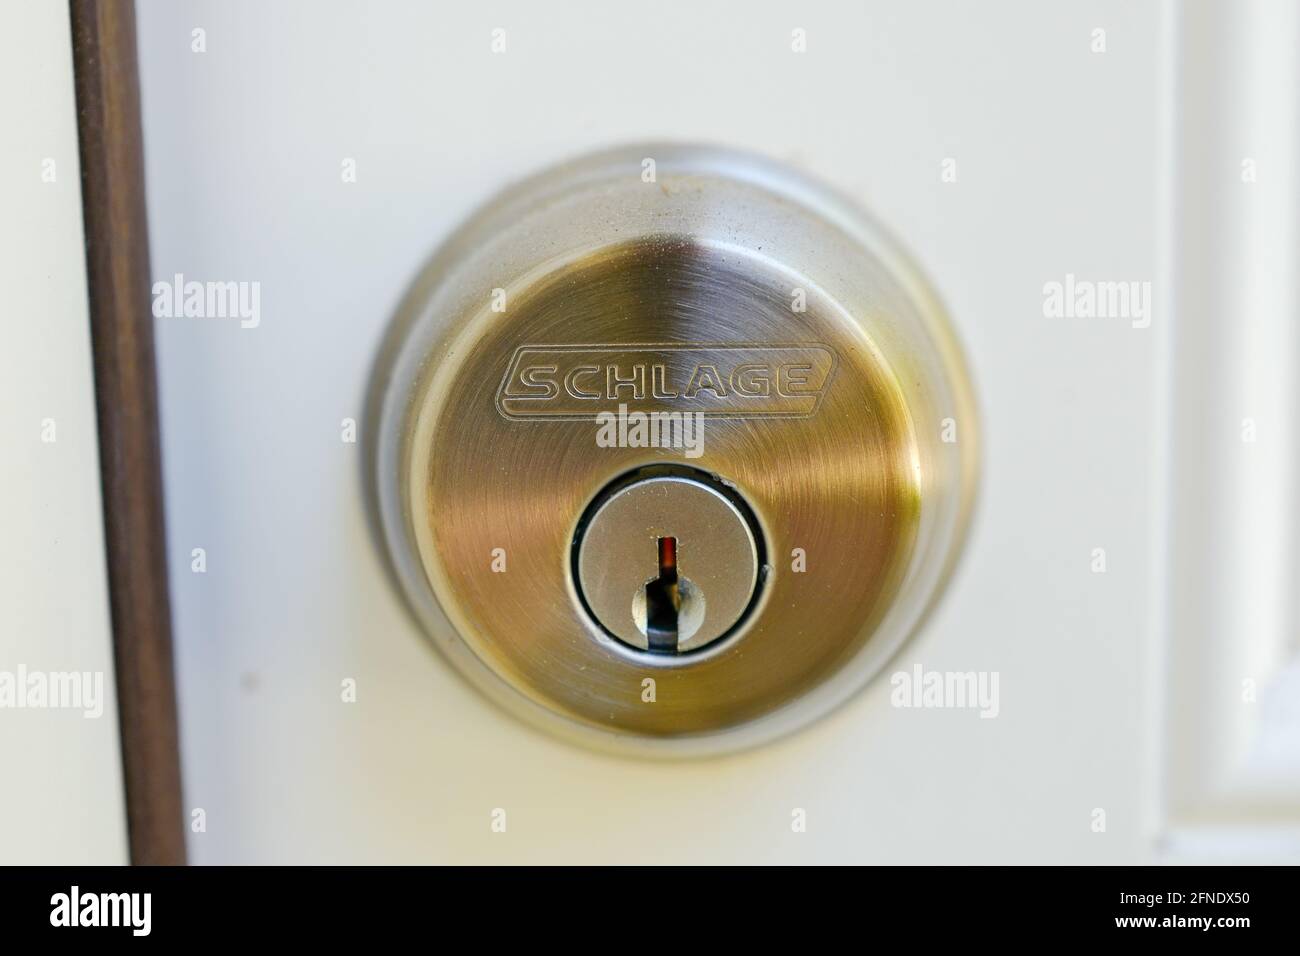 Close-up of a bronze deadbolt with a Schlage logo, attached to a white door, February 17, 2021. () Stock Photo